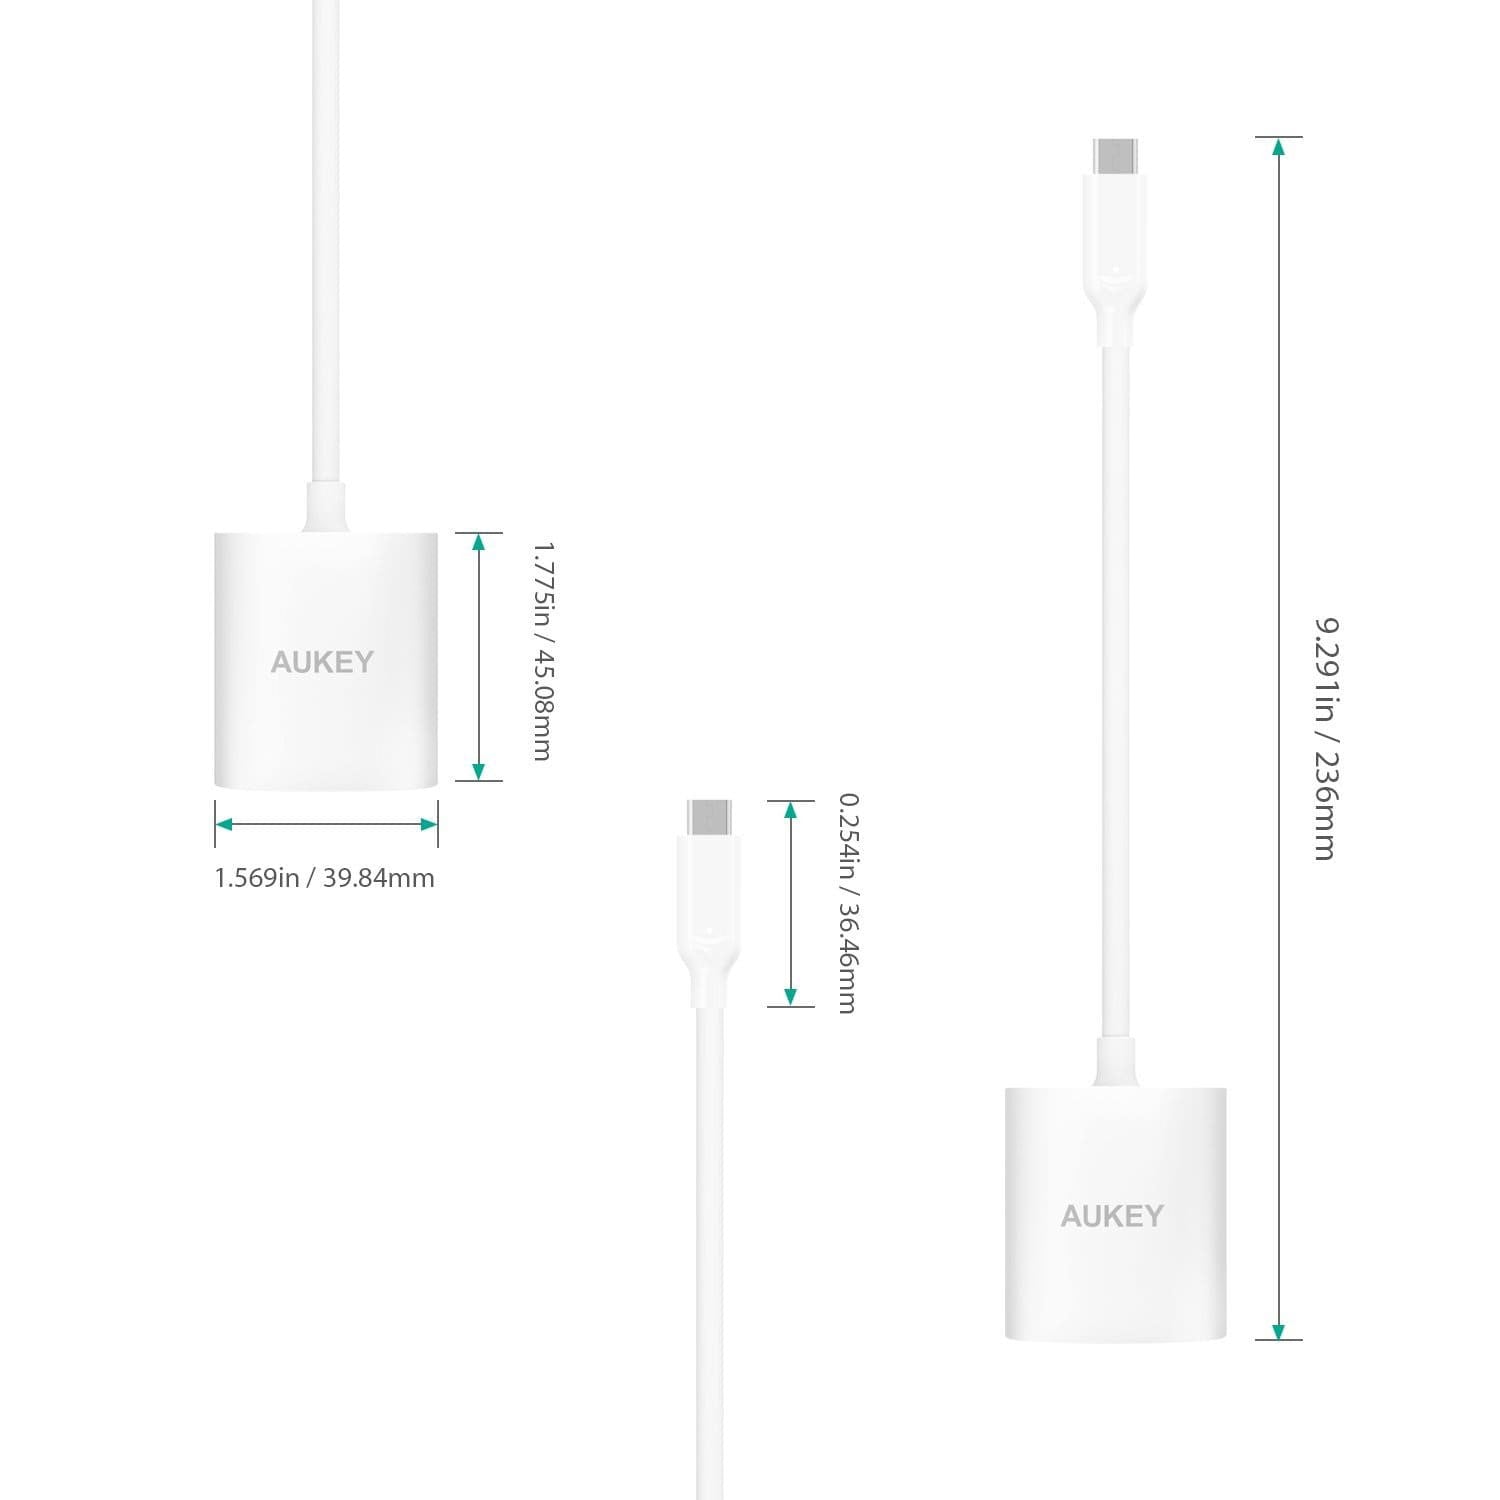 AUKEY CB-C39 USB C to RJ45 Gigabit Ethernet USB Network LAN Adapter - Aukey Malaysia Official Store